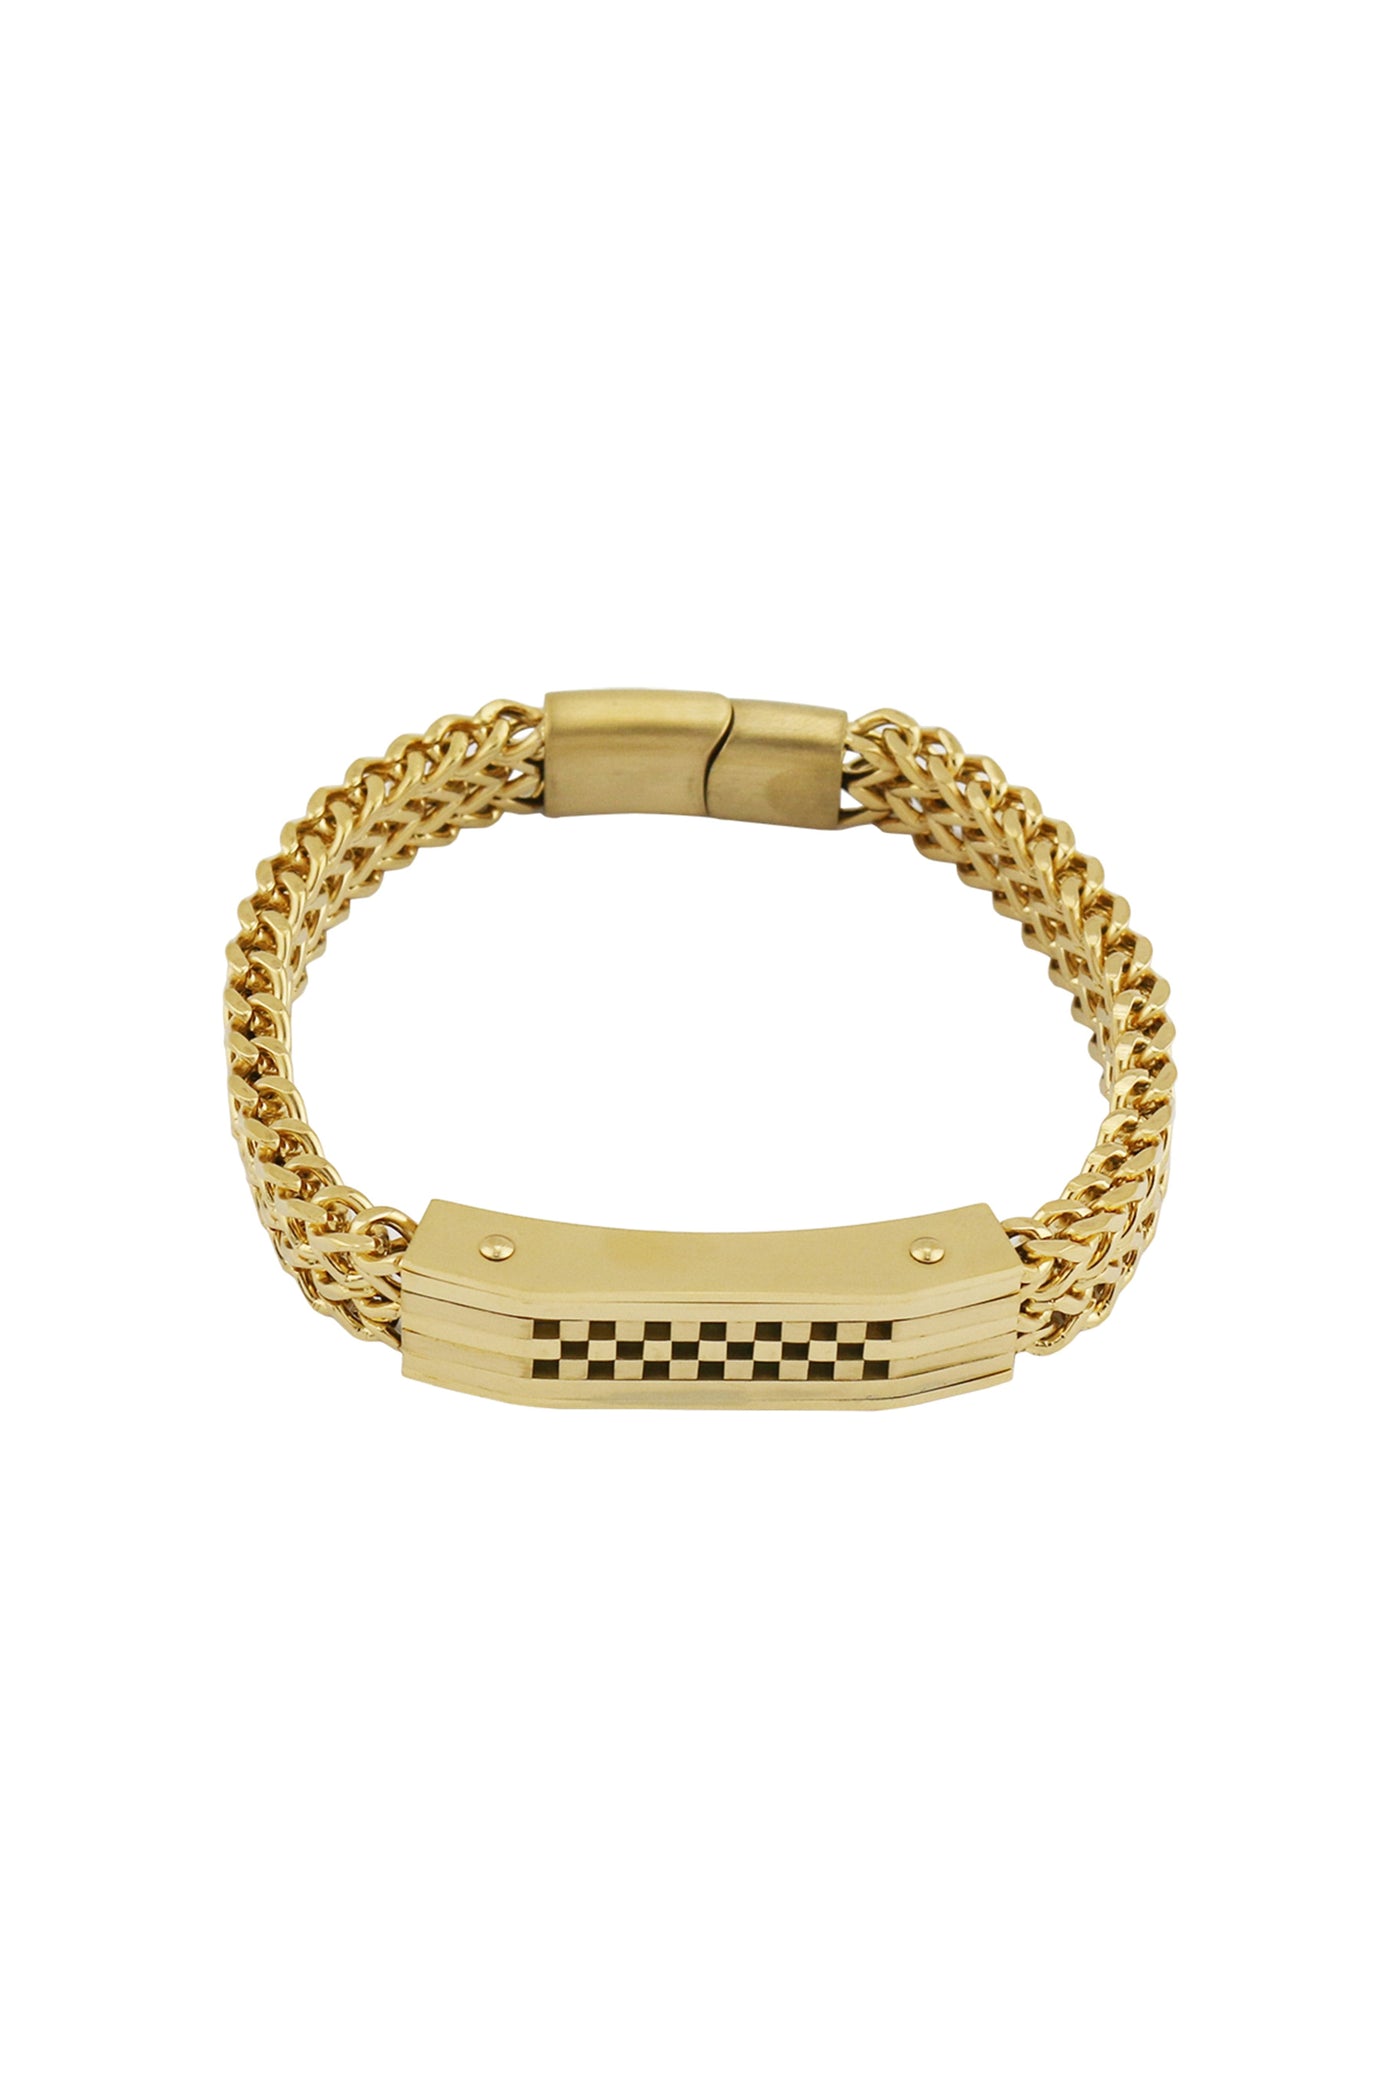 Marquee Gold Chunky Bracelet